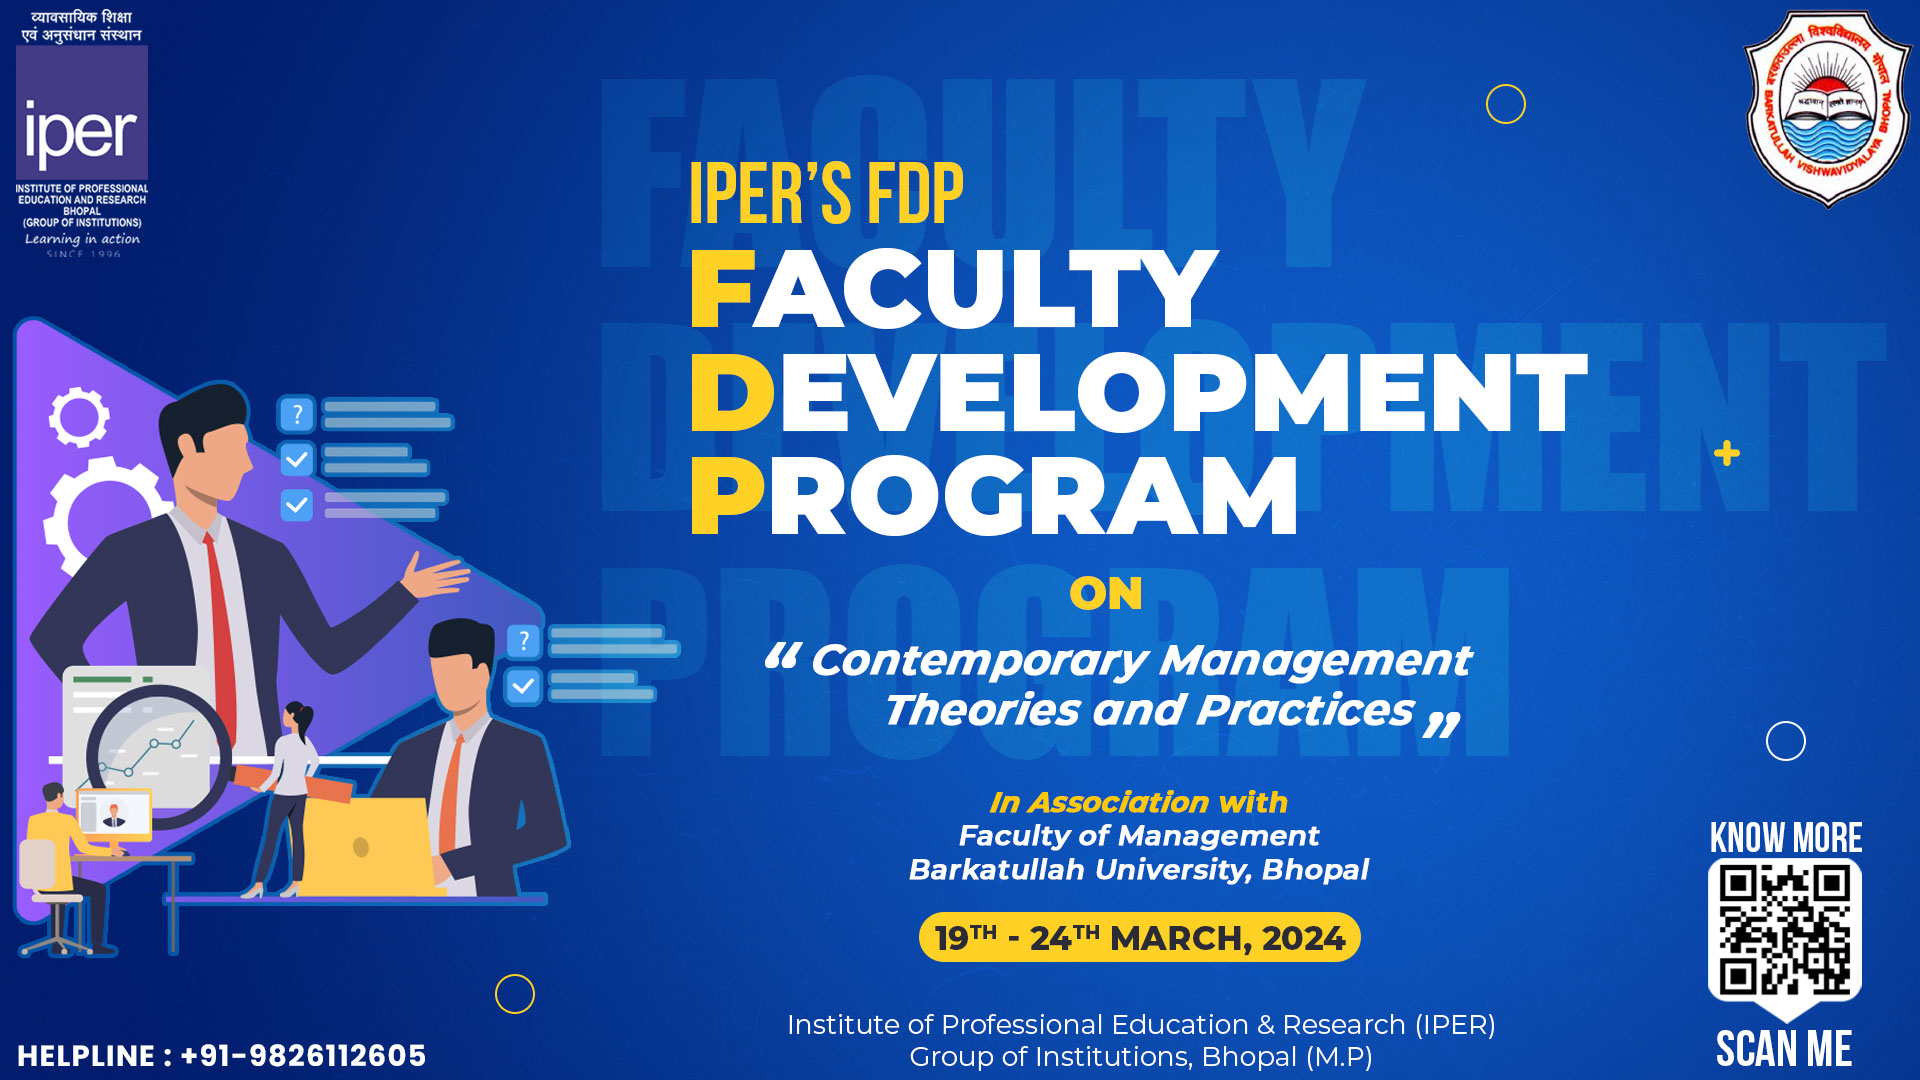 Faculty Development Programme (FDP) at IPER on "Contemporary Management